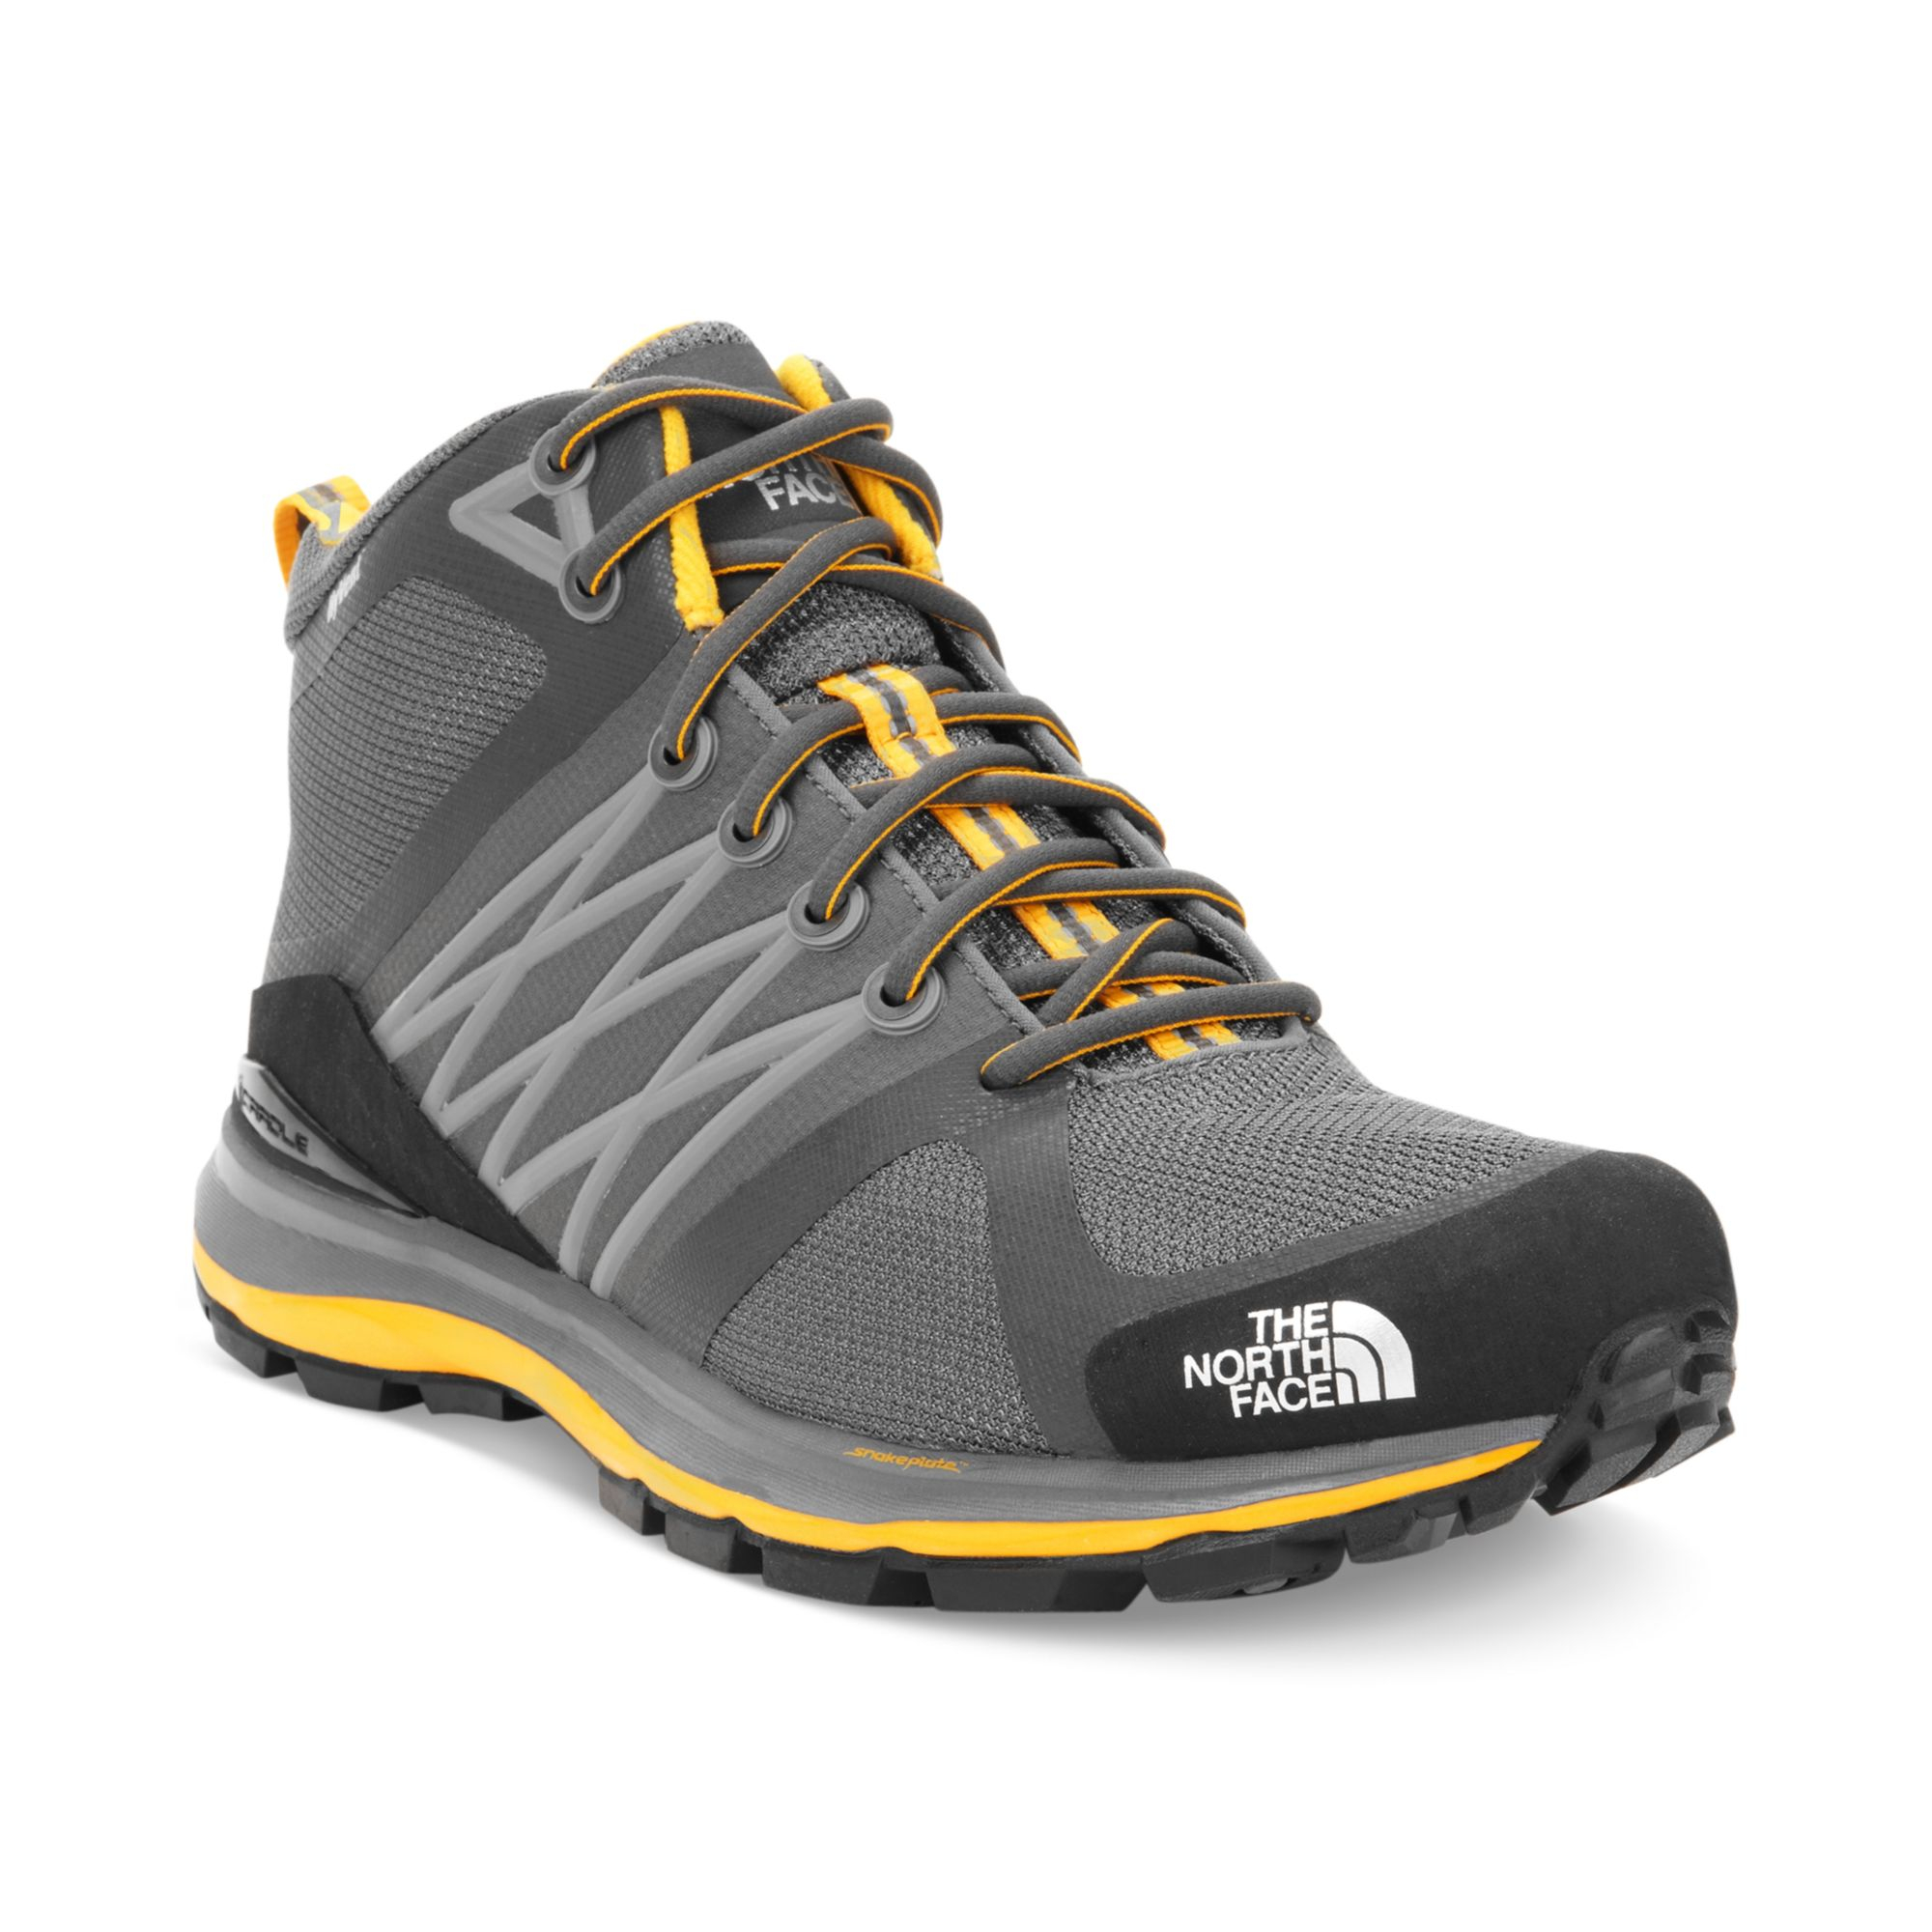 The North Face Boots in Gray for Men - Lyst